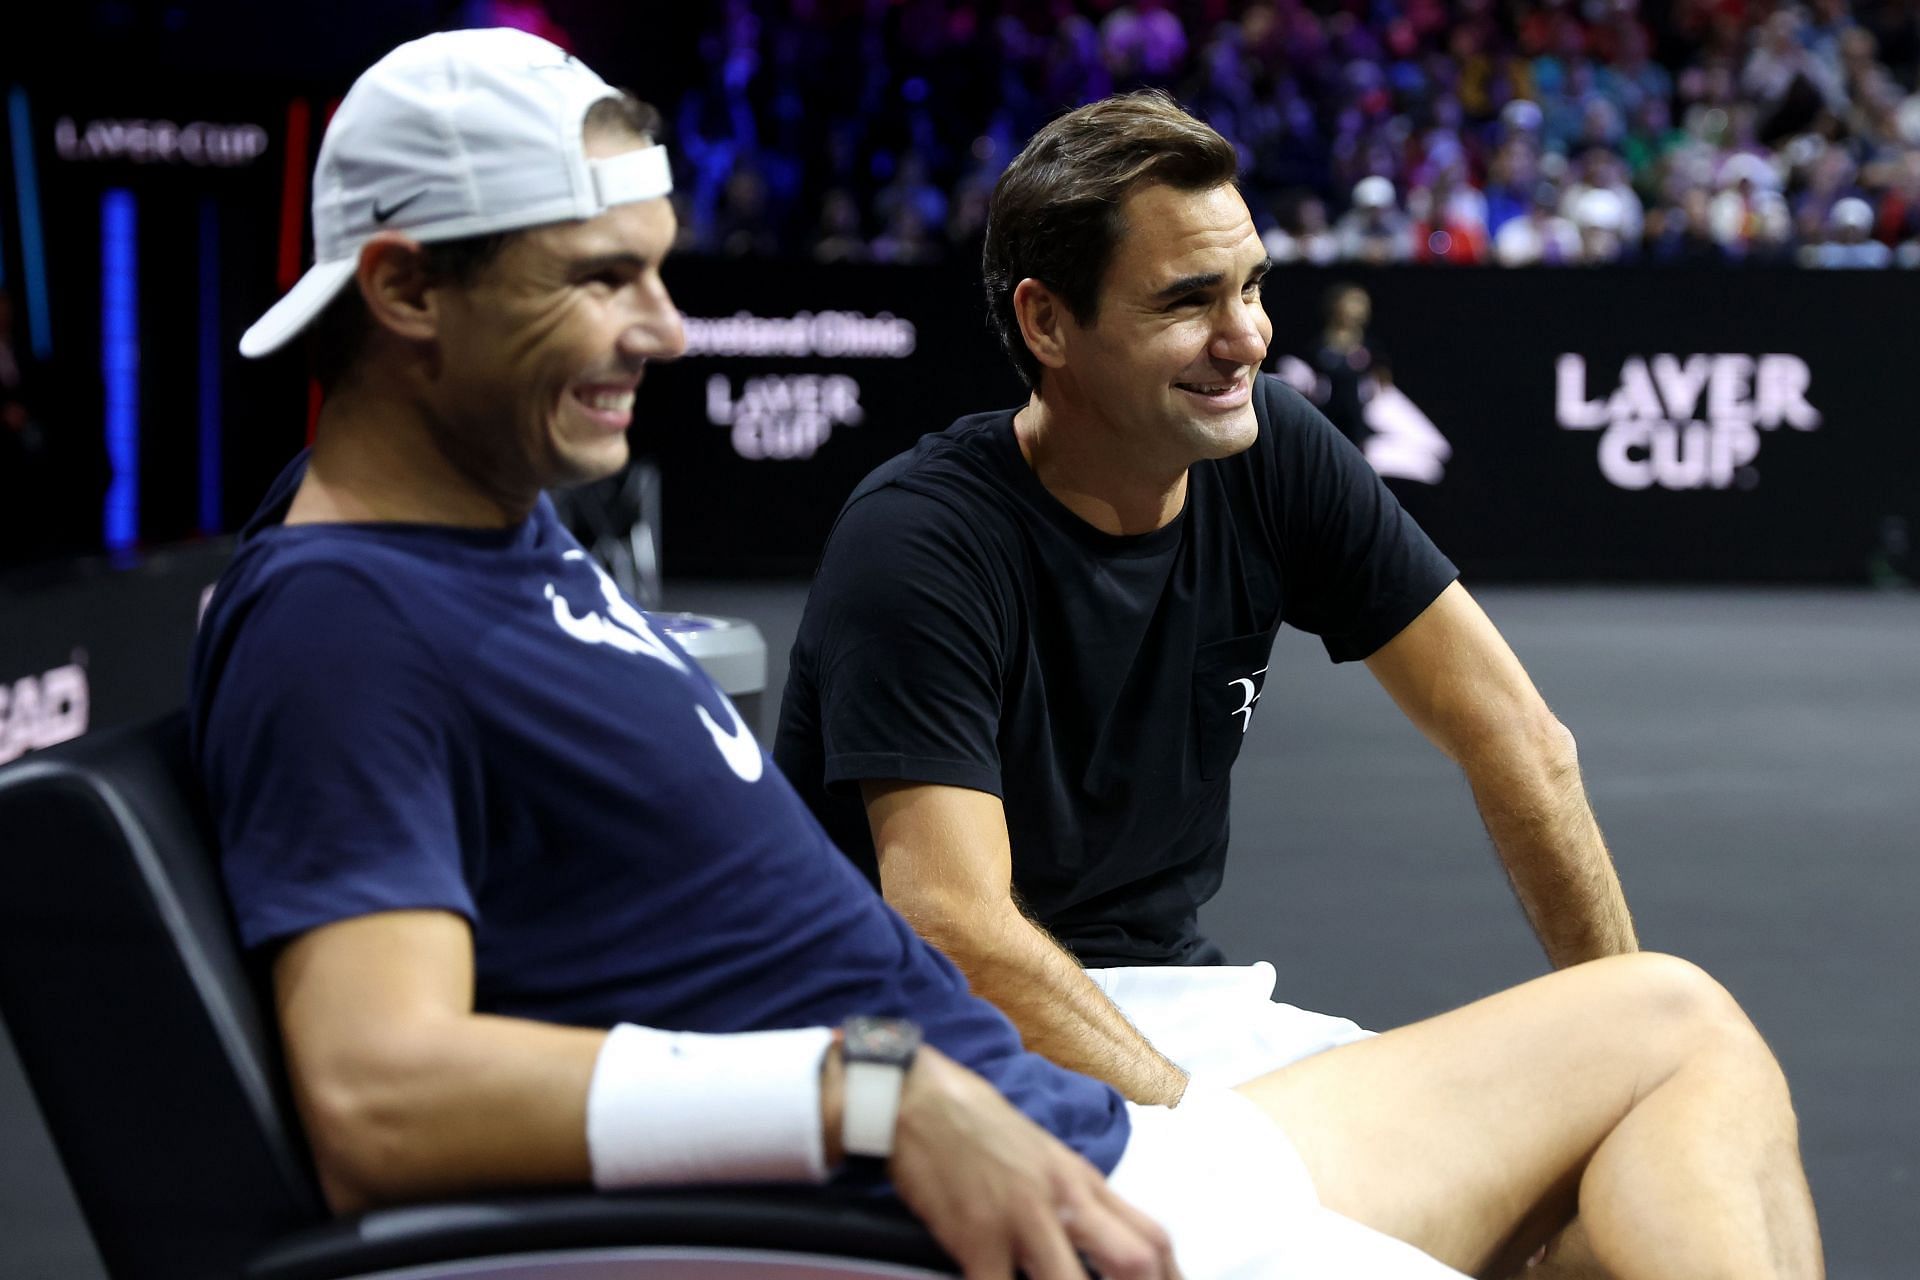 Federer and Nadal will play in a doubles match-up on Friday